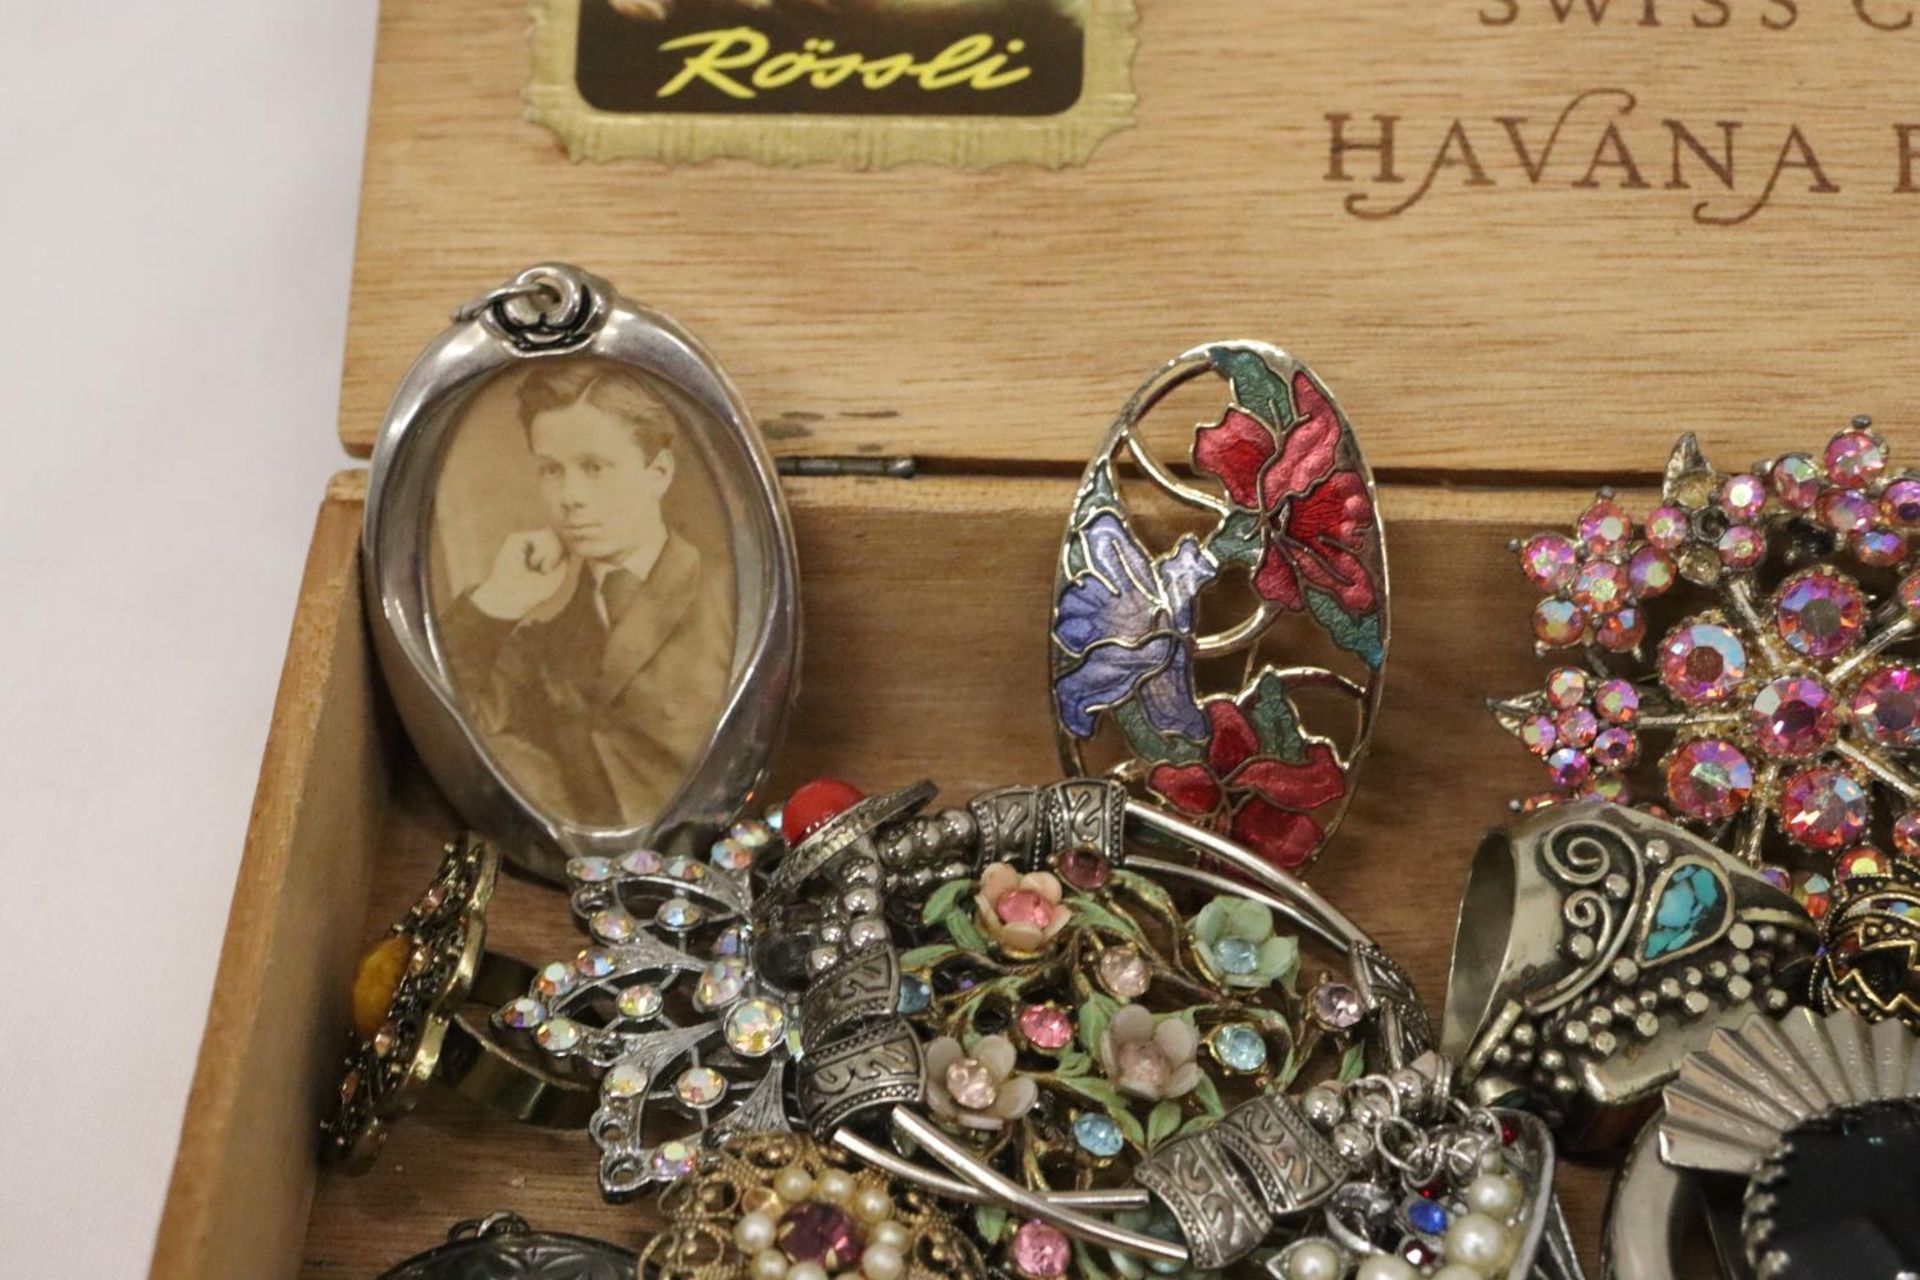 A QUANTITY OF VINTAGE COSTUME JEWELLERY TO INCLUDE RINGS, BROOCHES AND NECKLACES IN A CIGAR BOX - Image 3 of 10